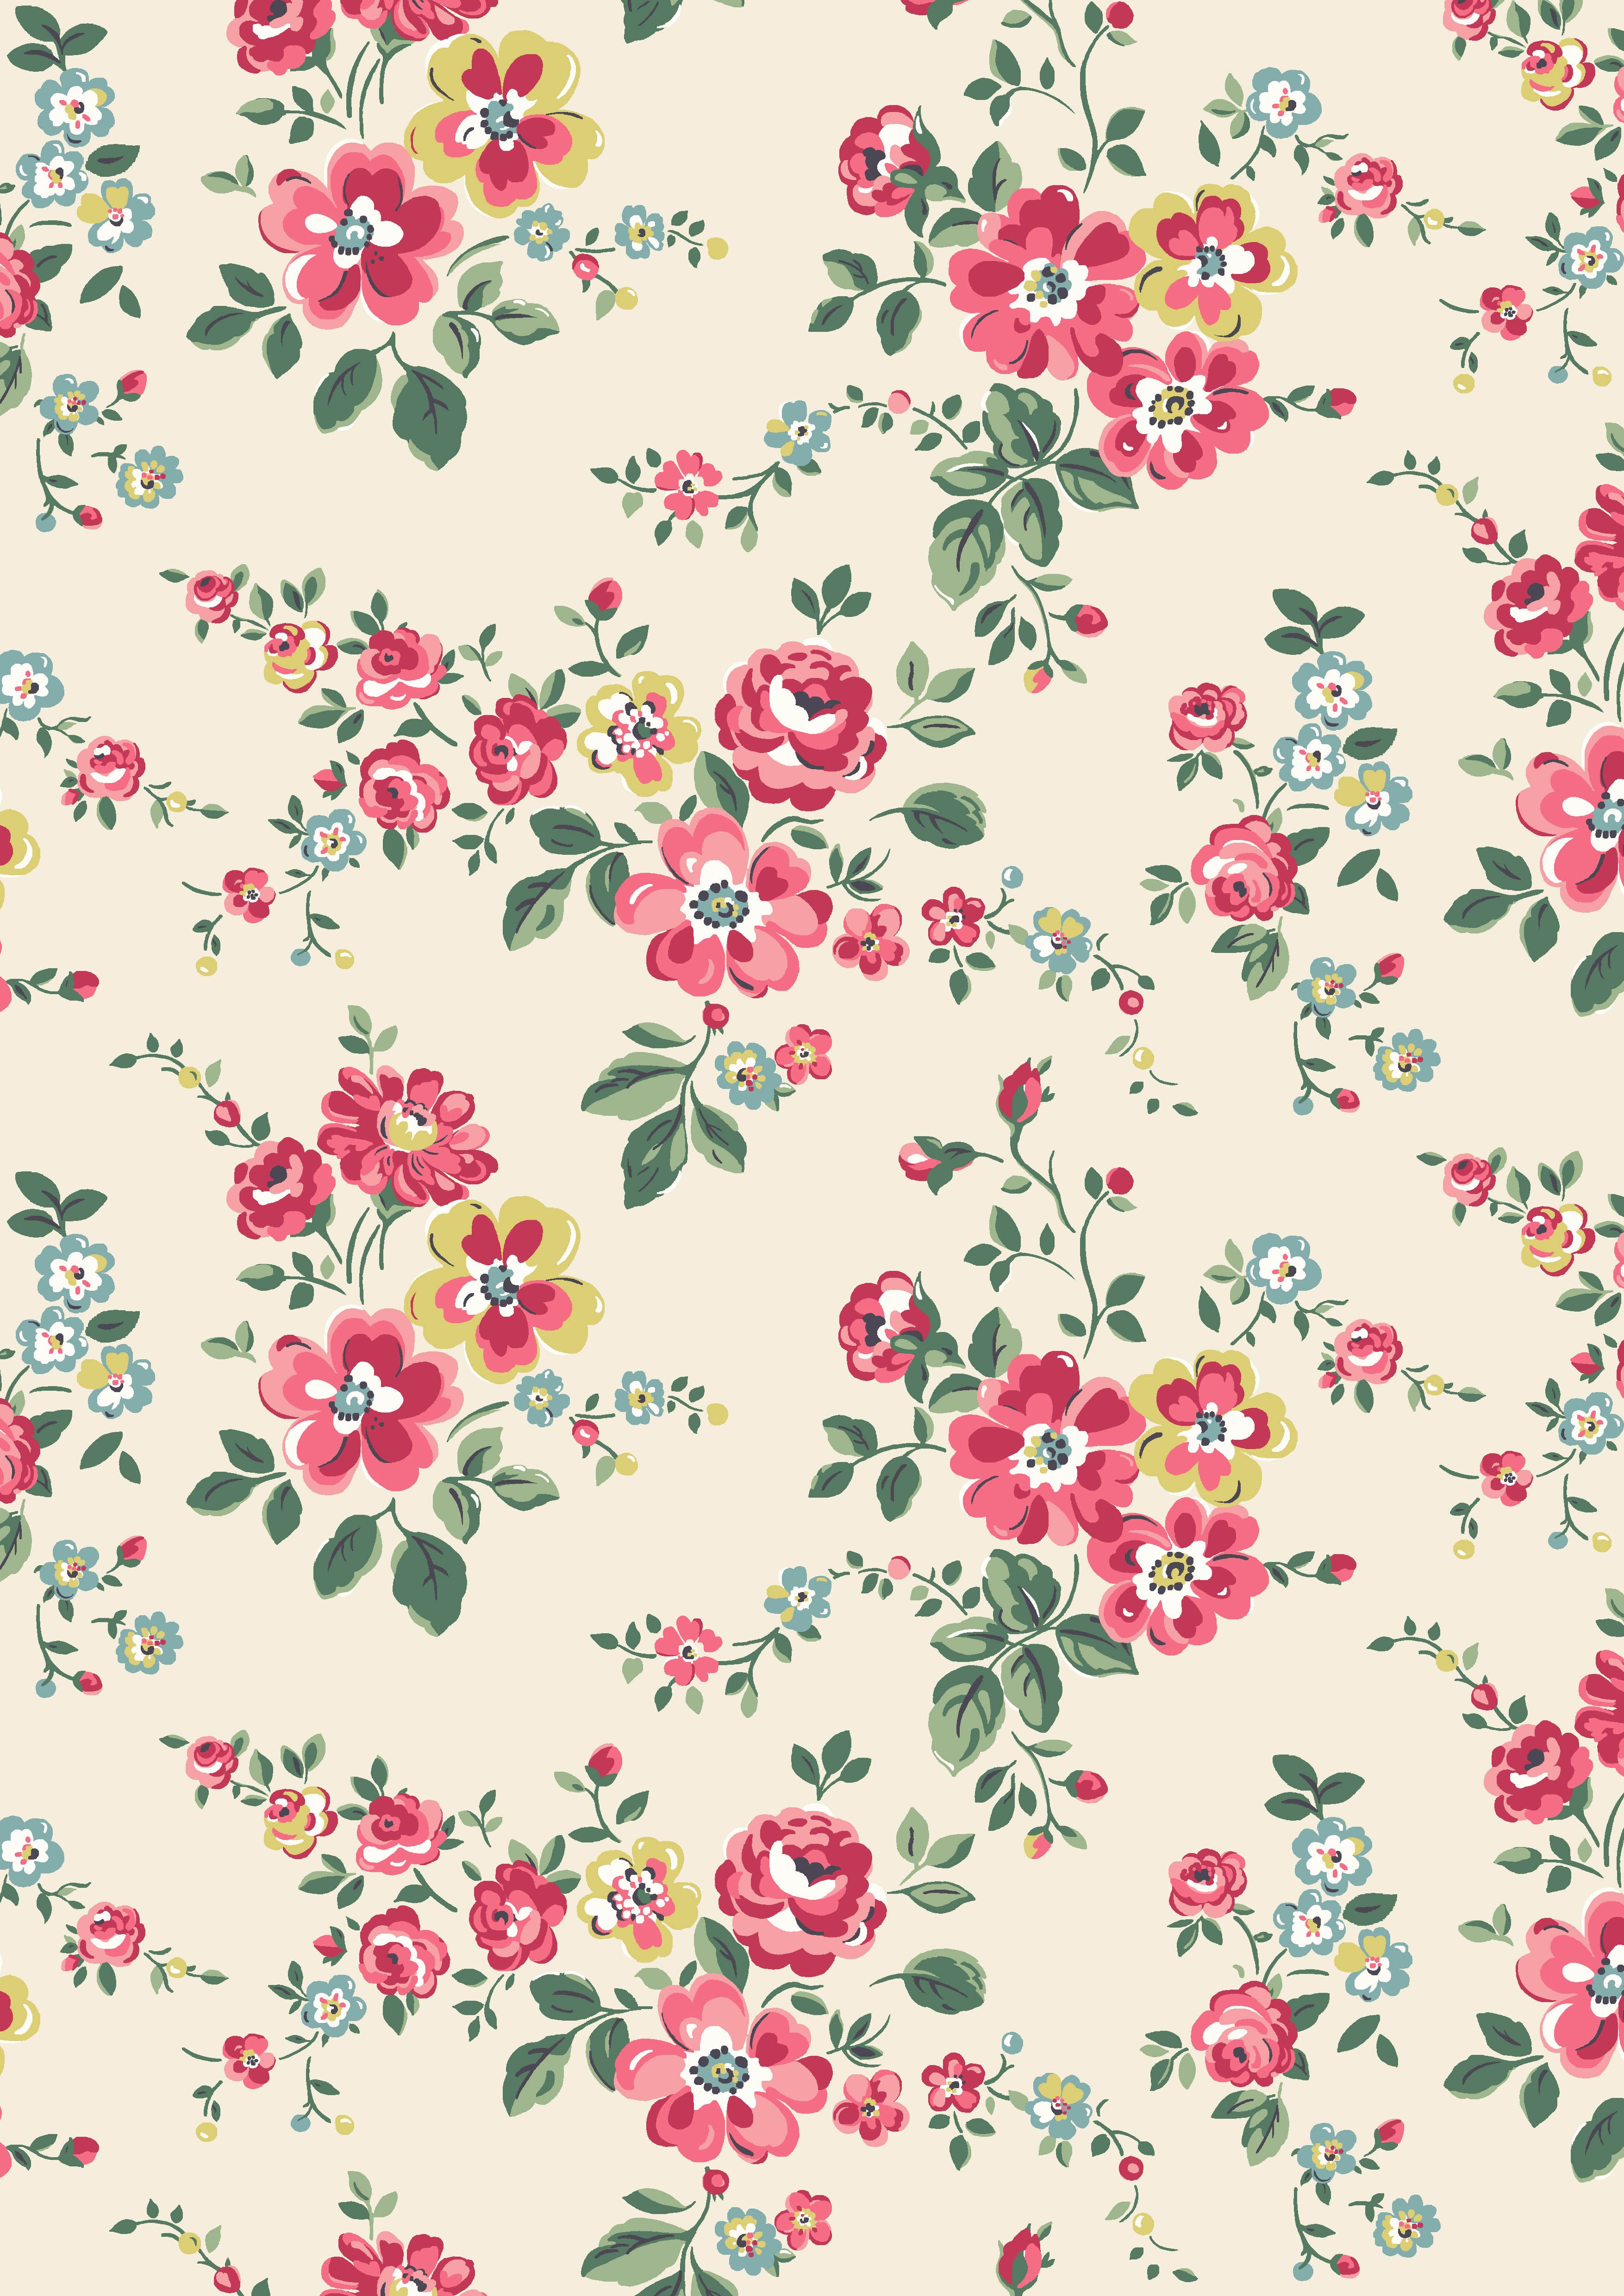 Search Results for thorp flowers. Floral print wallpaper, Phone wallpaper image, Floral wallpaper